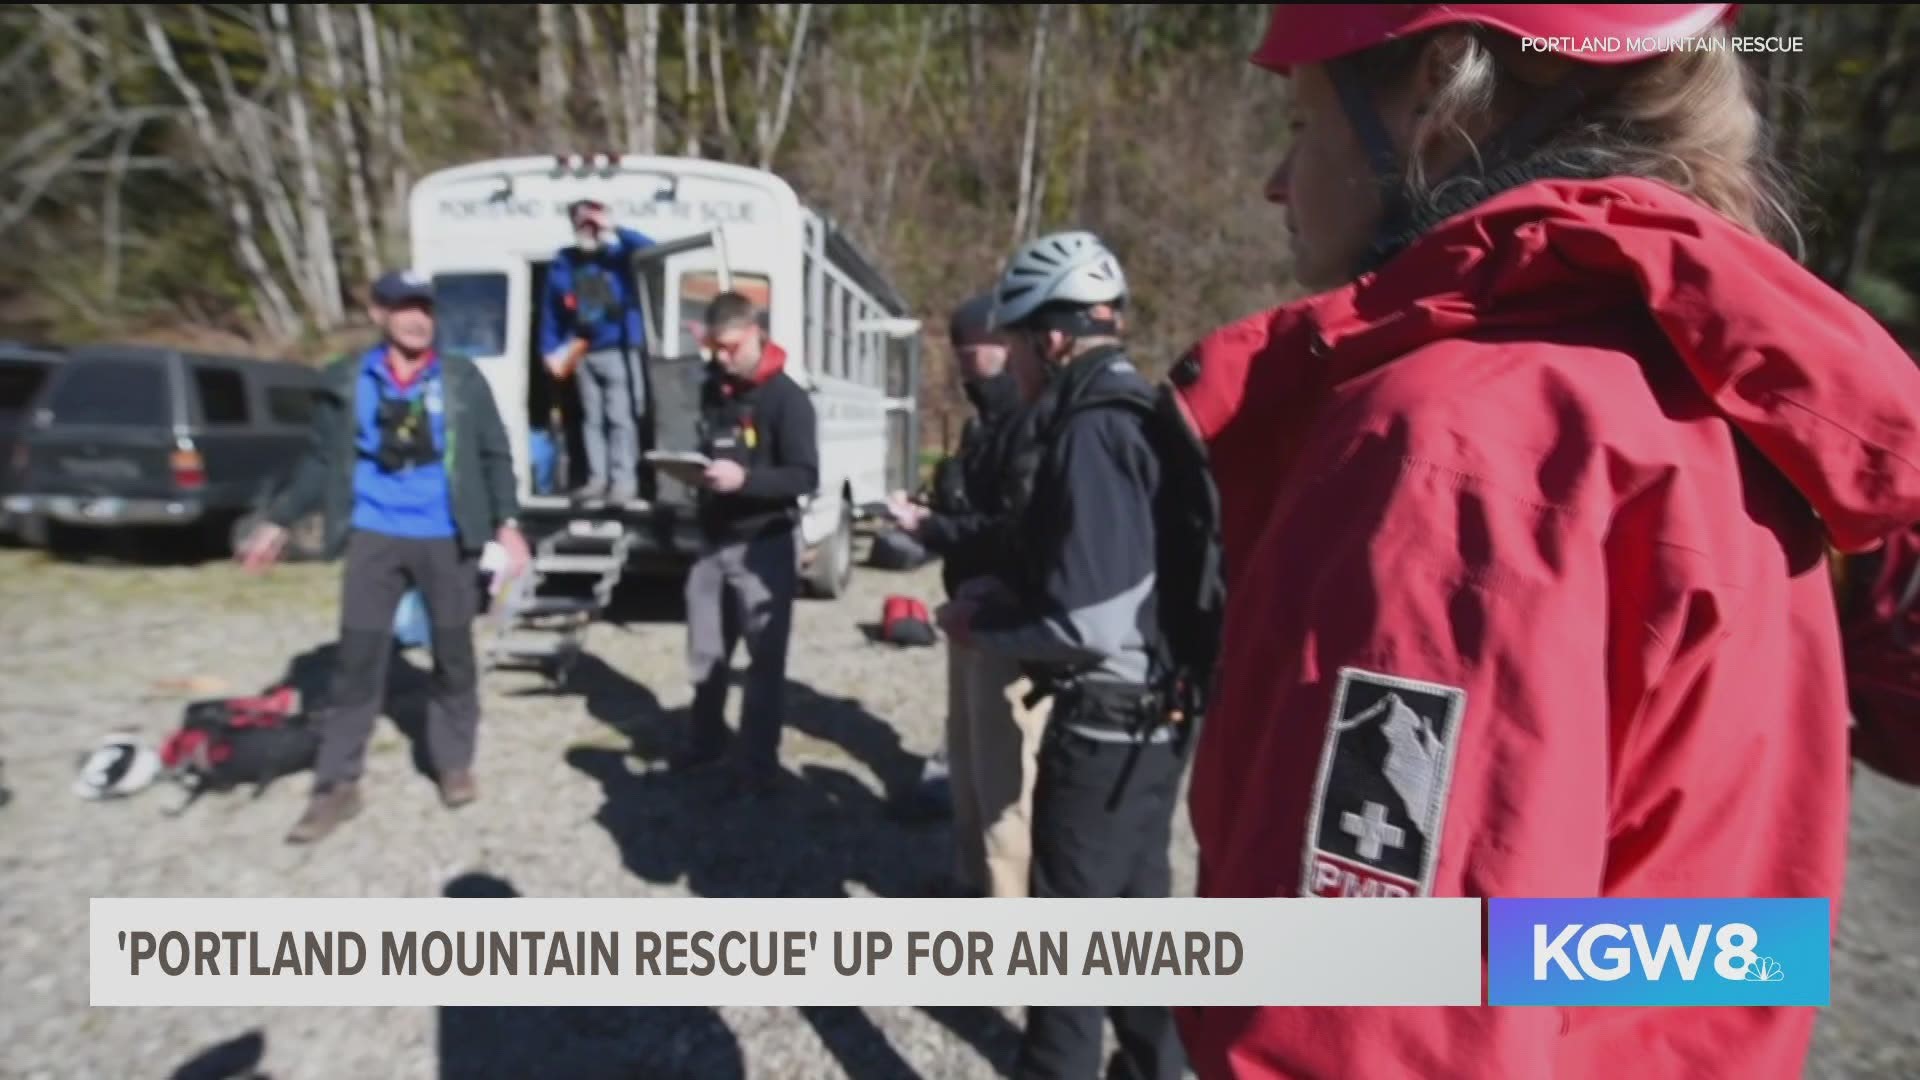 Portland Mountain Rescue is a finalist for Land Rover's Defender Above and Beyond Service Awards. Voting is open now through May 3.